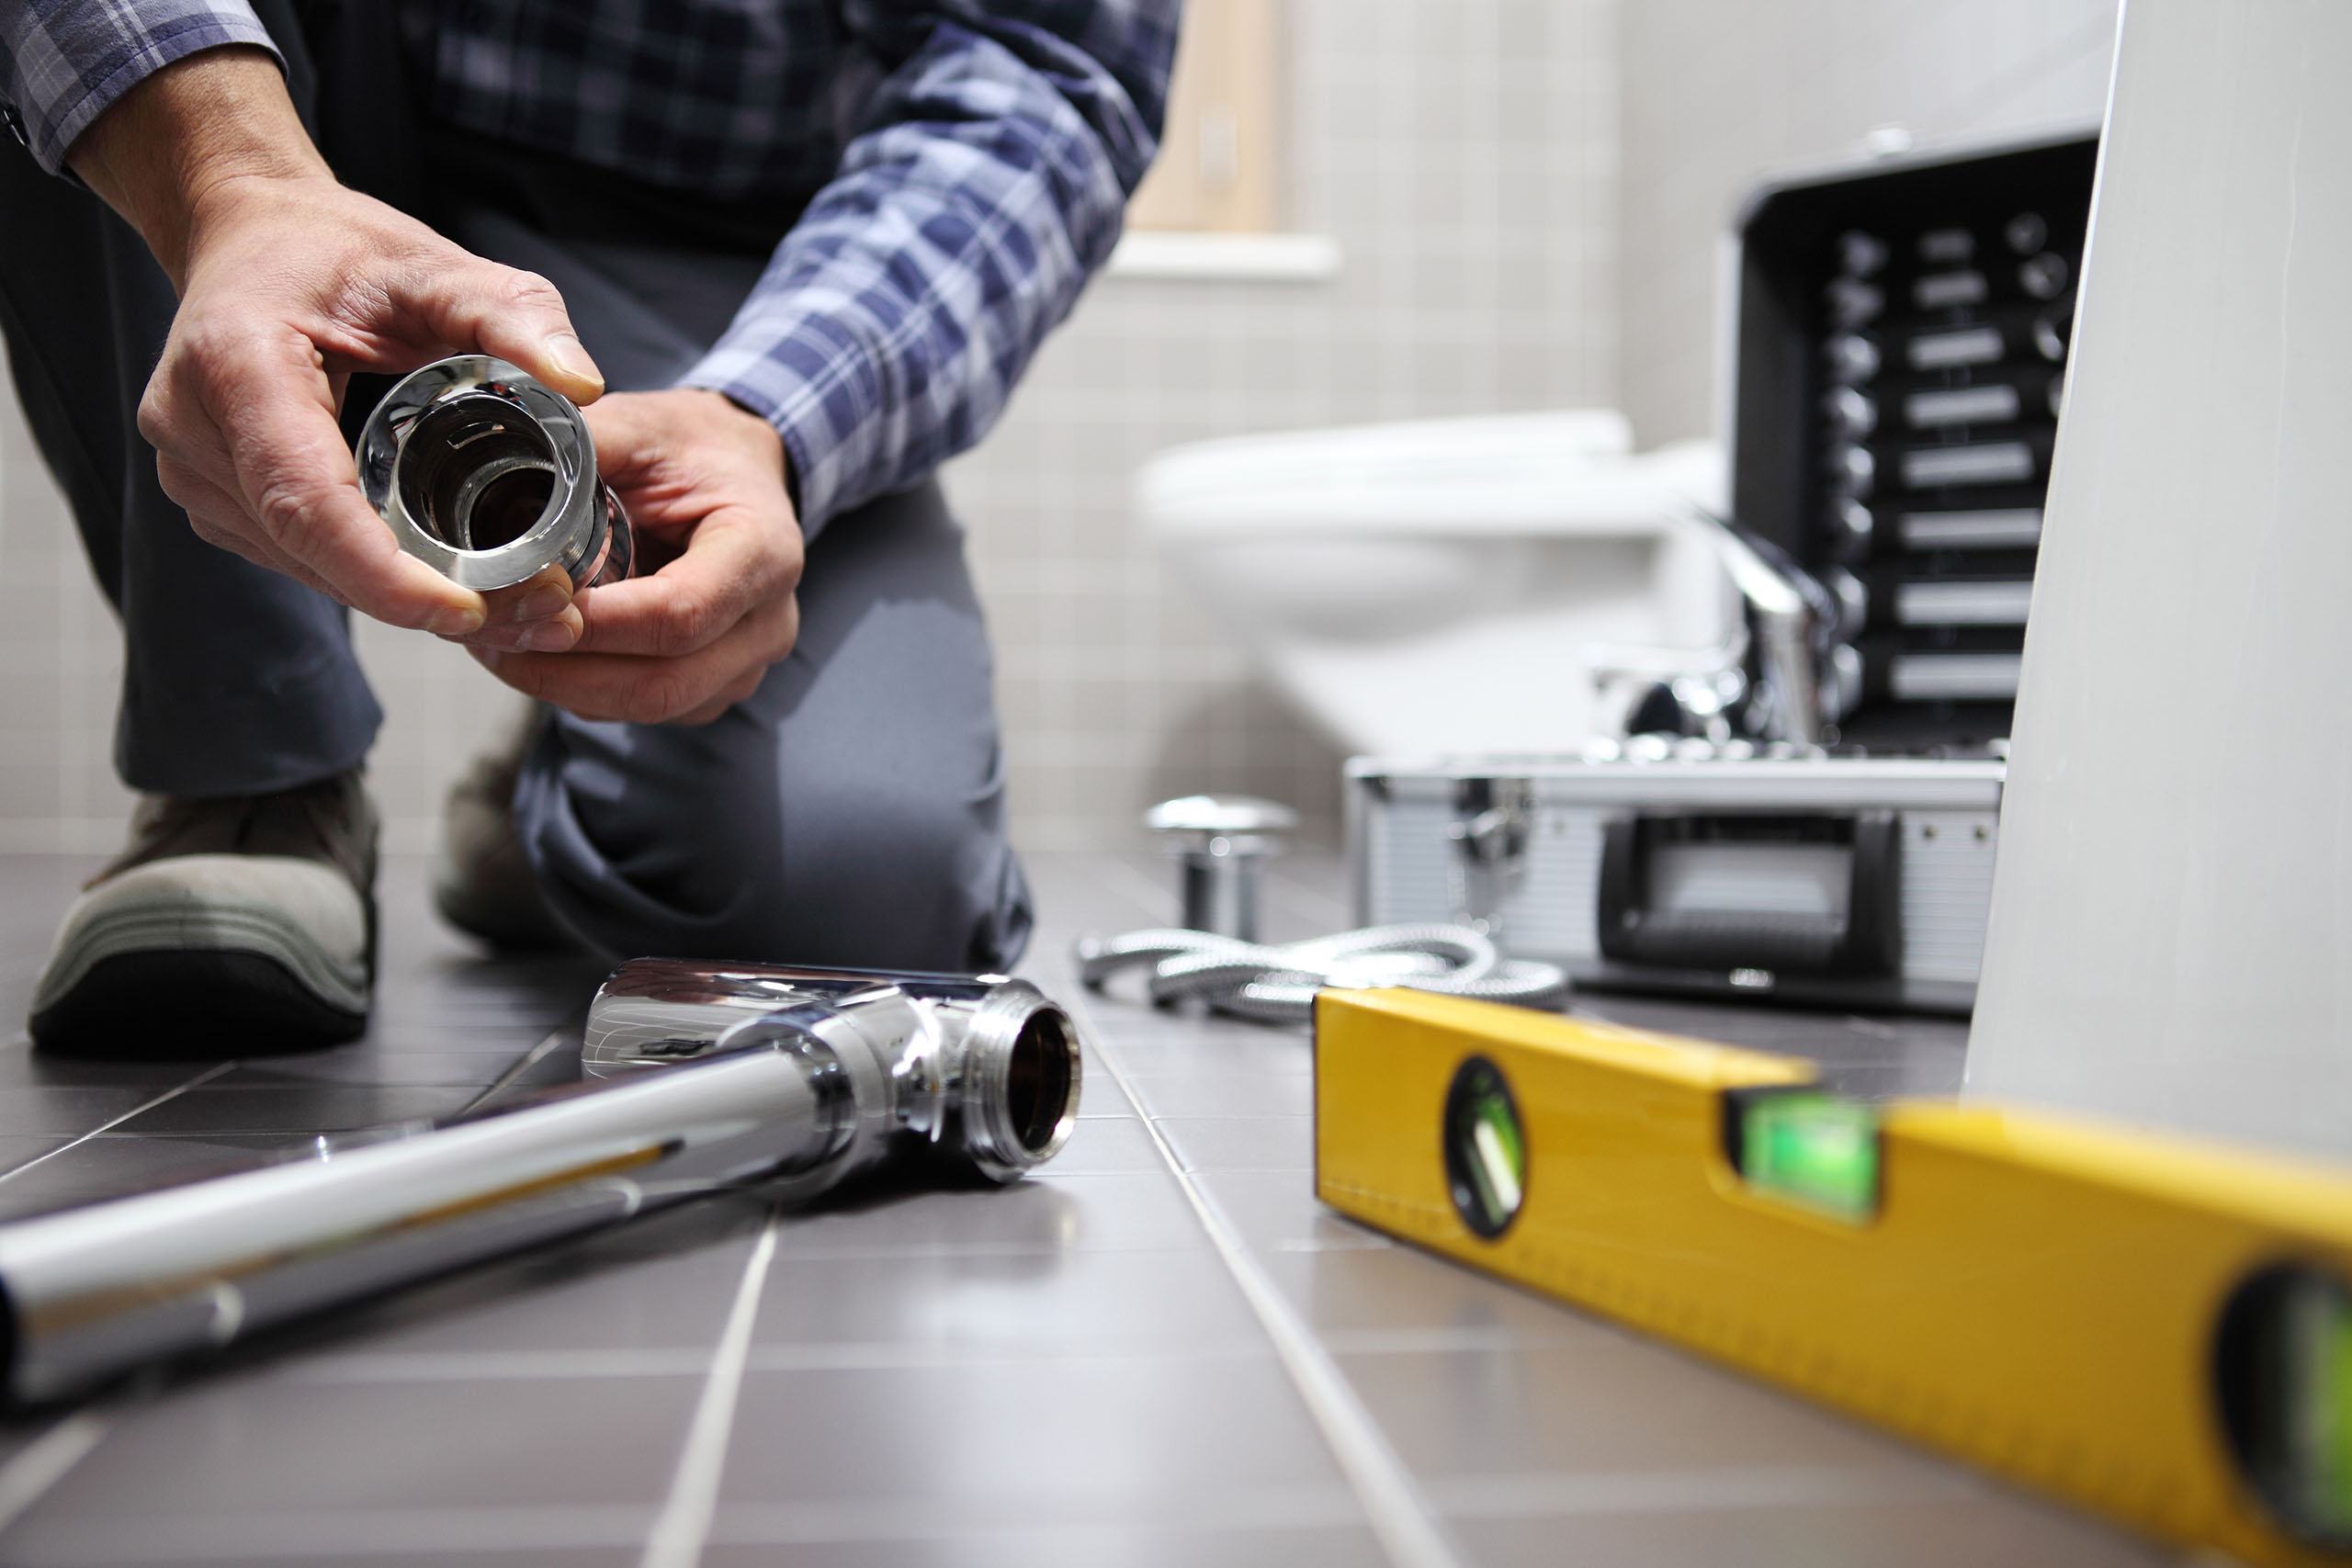 DIY vs Professional: When Should You Call a Plumber for Your Plumbing Problems